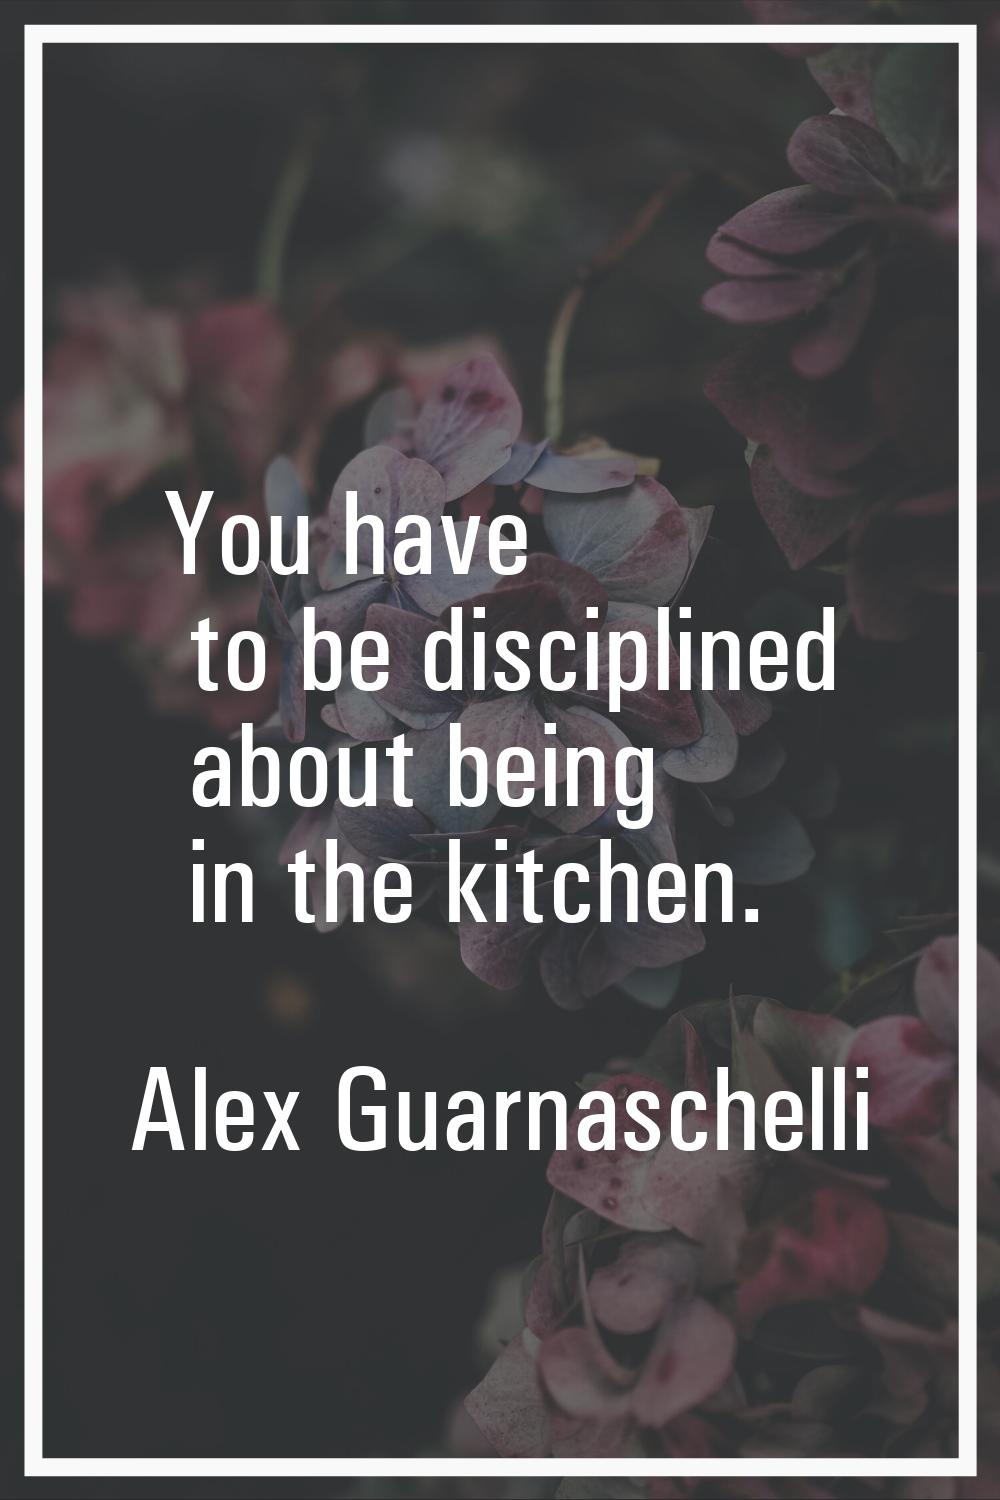 You have to be disciplined about being in the kitchen.